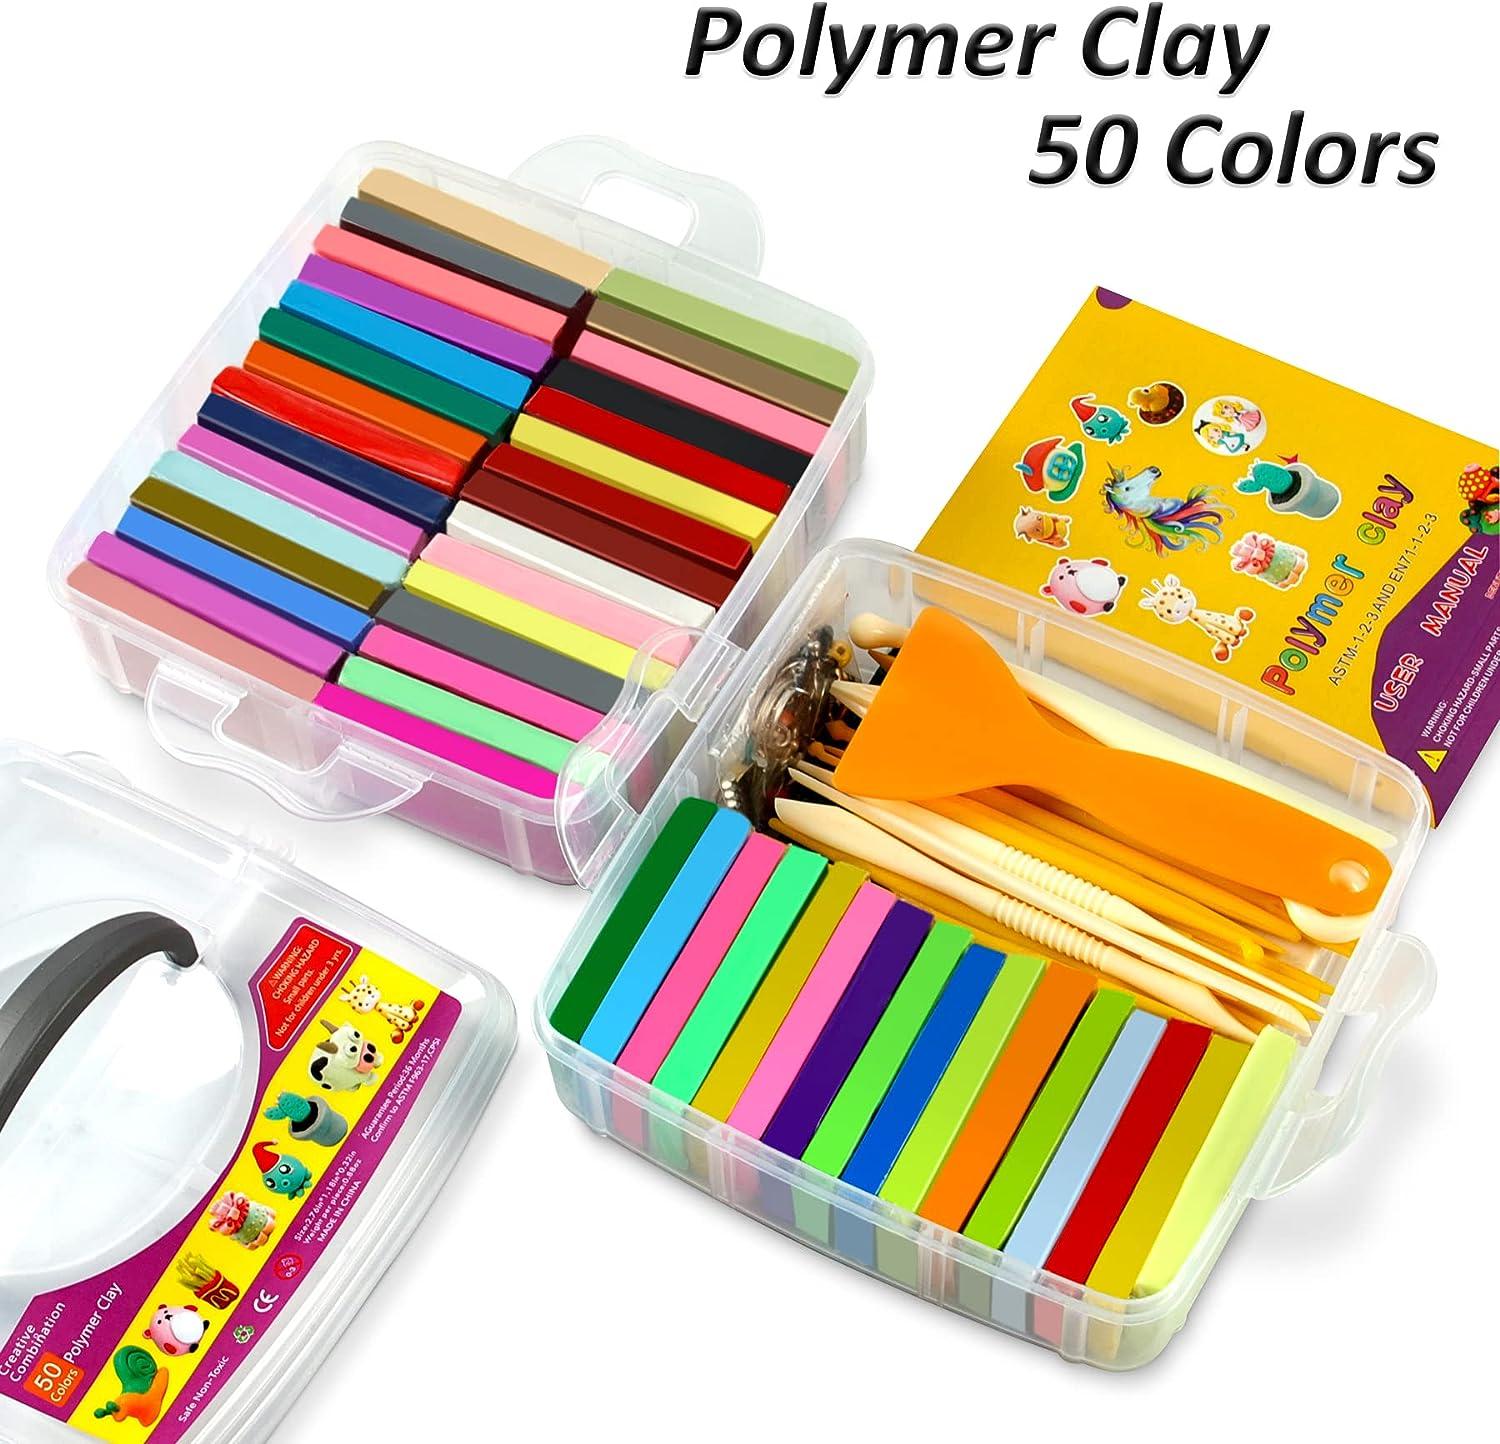 Polymer Clay - 27 Colors Glitter Modeling Clay for Kids, Non-Toxic,  Non-Stick Oven Bake Clay, Easy to Mold, Sculpting and Bake DIY Starter  Kits